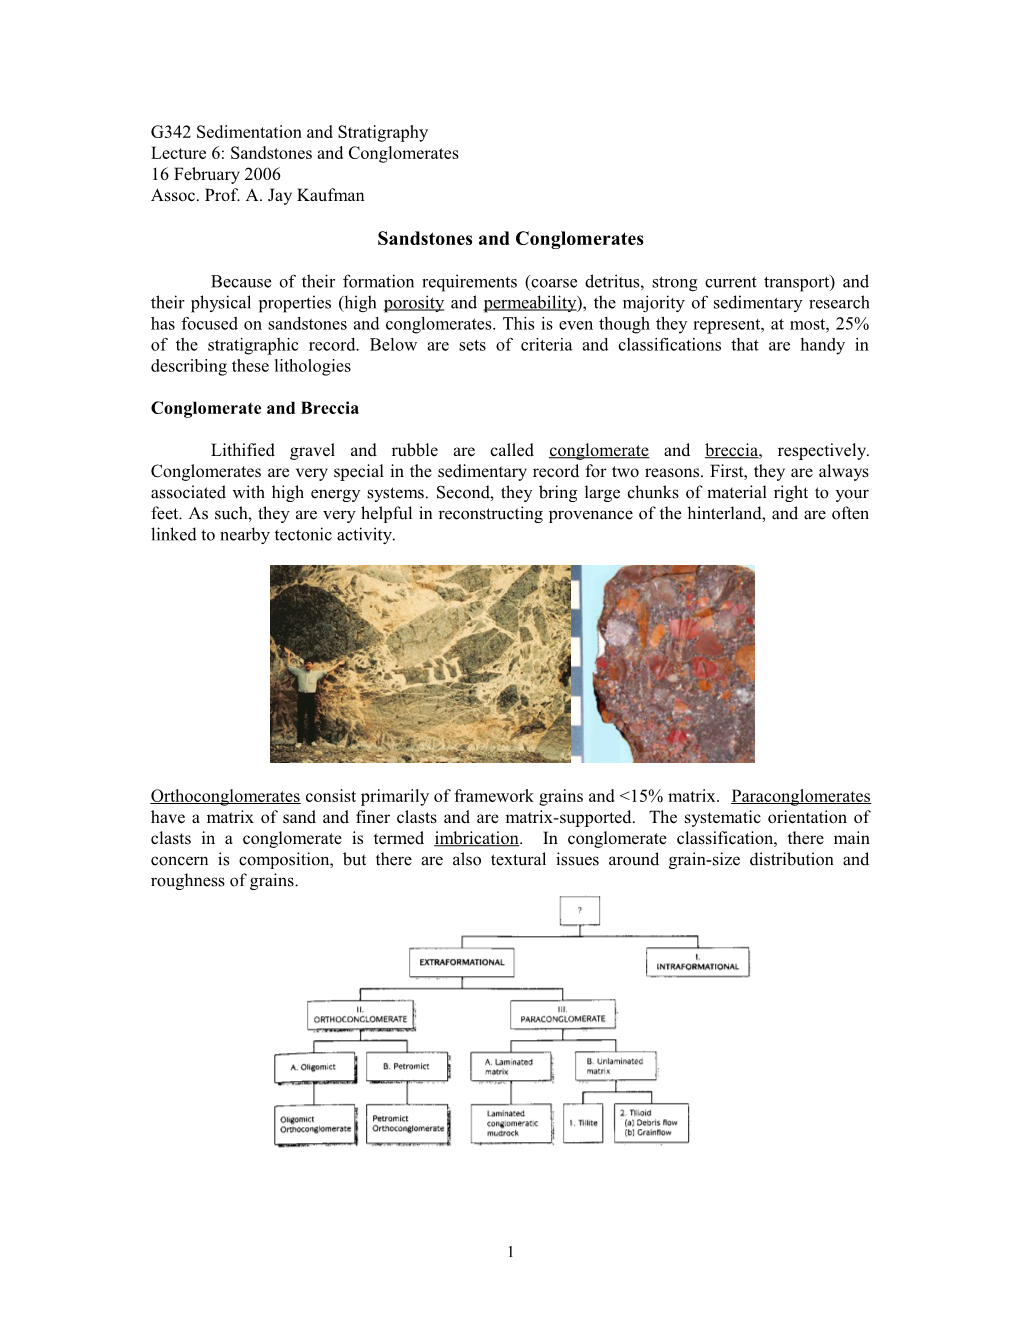 Lecture 6: Sandstones and Conglomerates